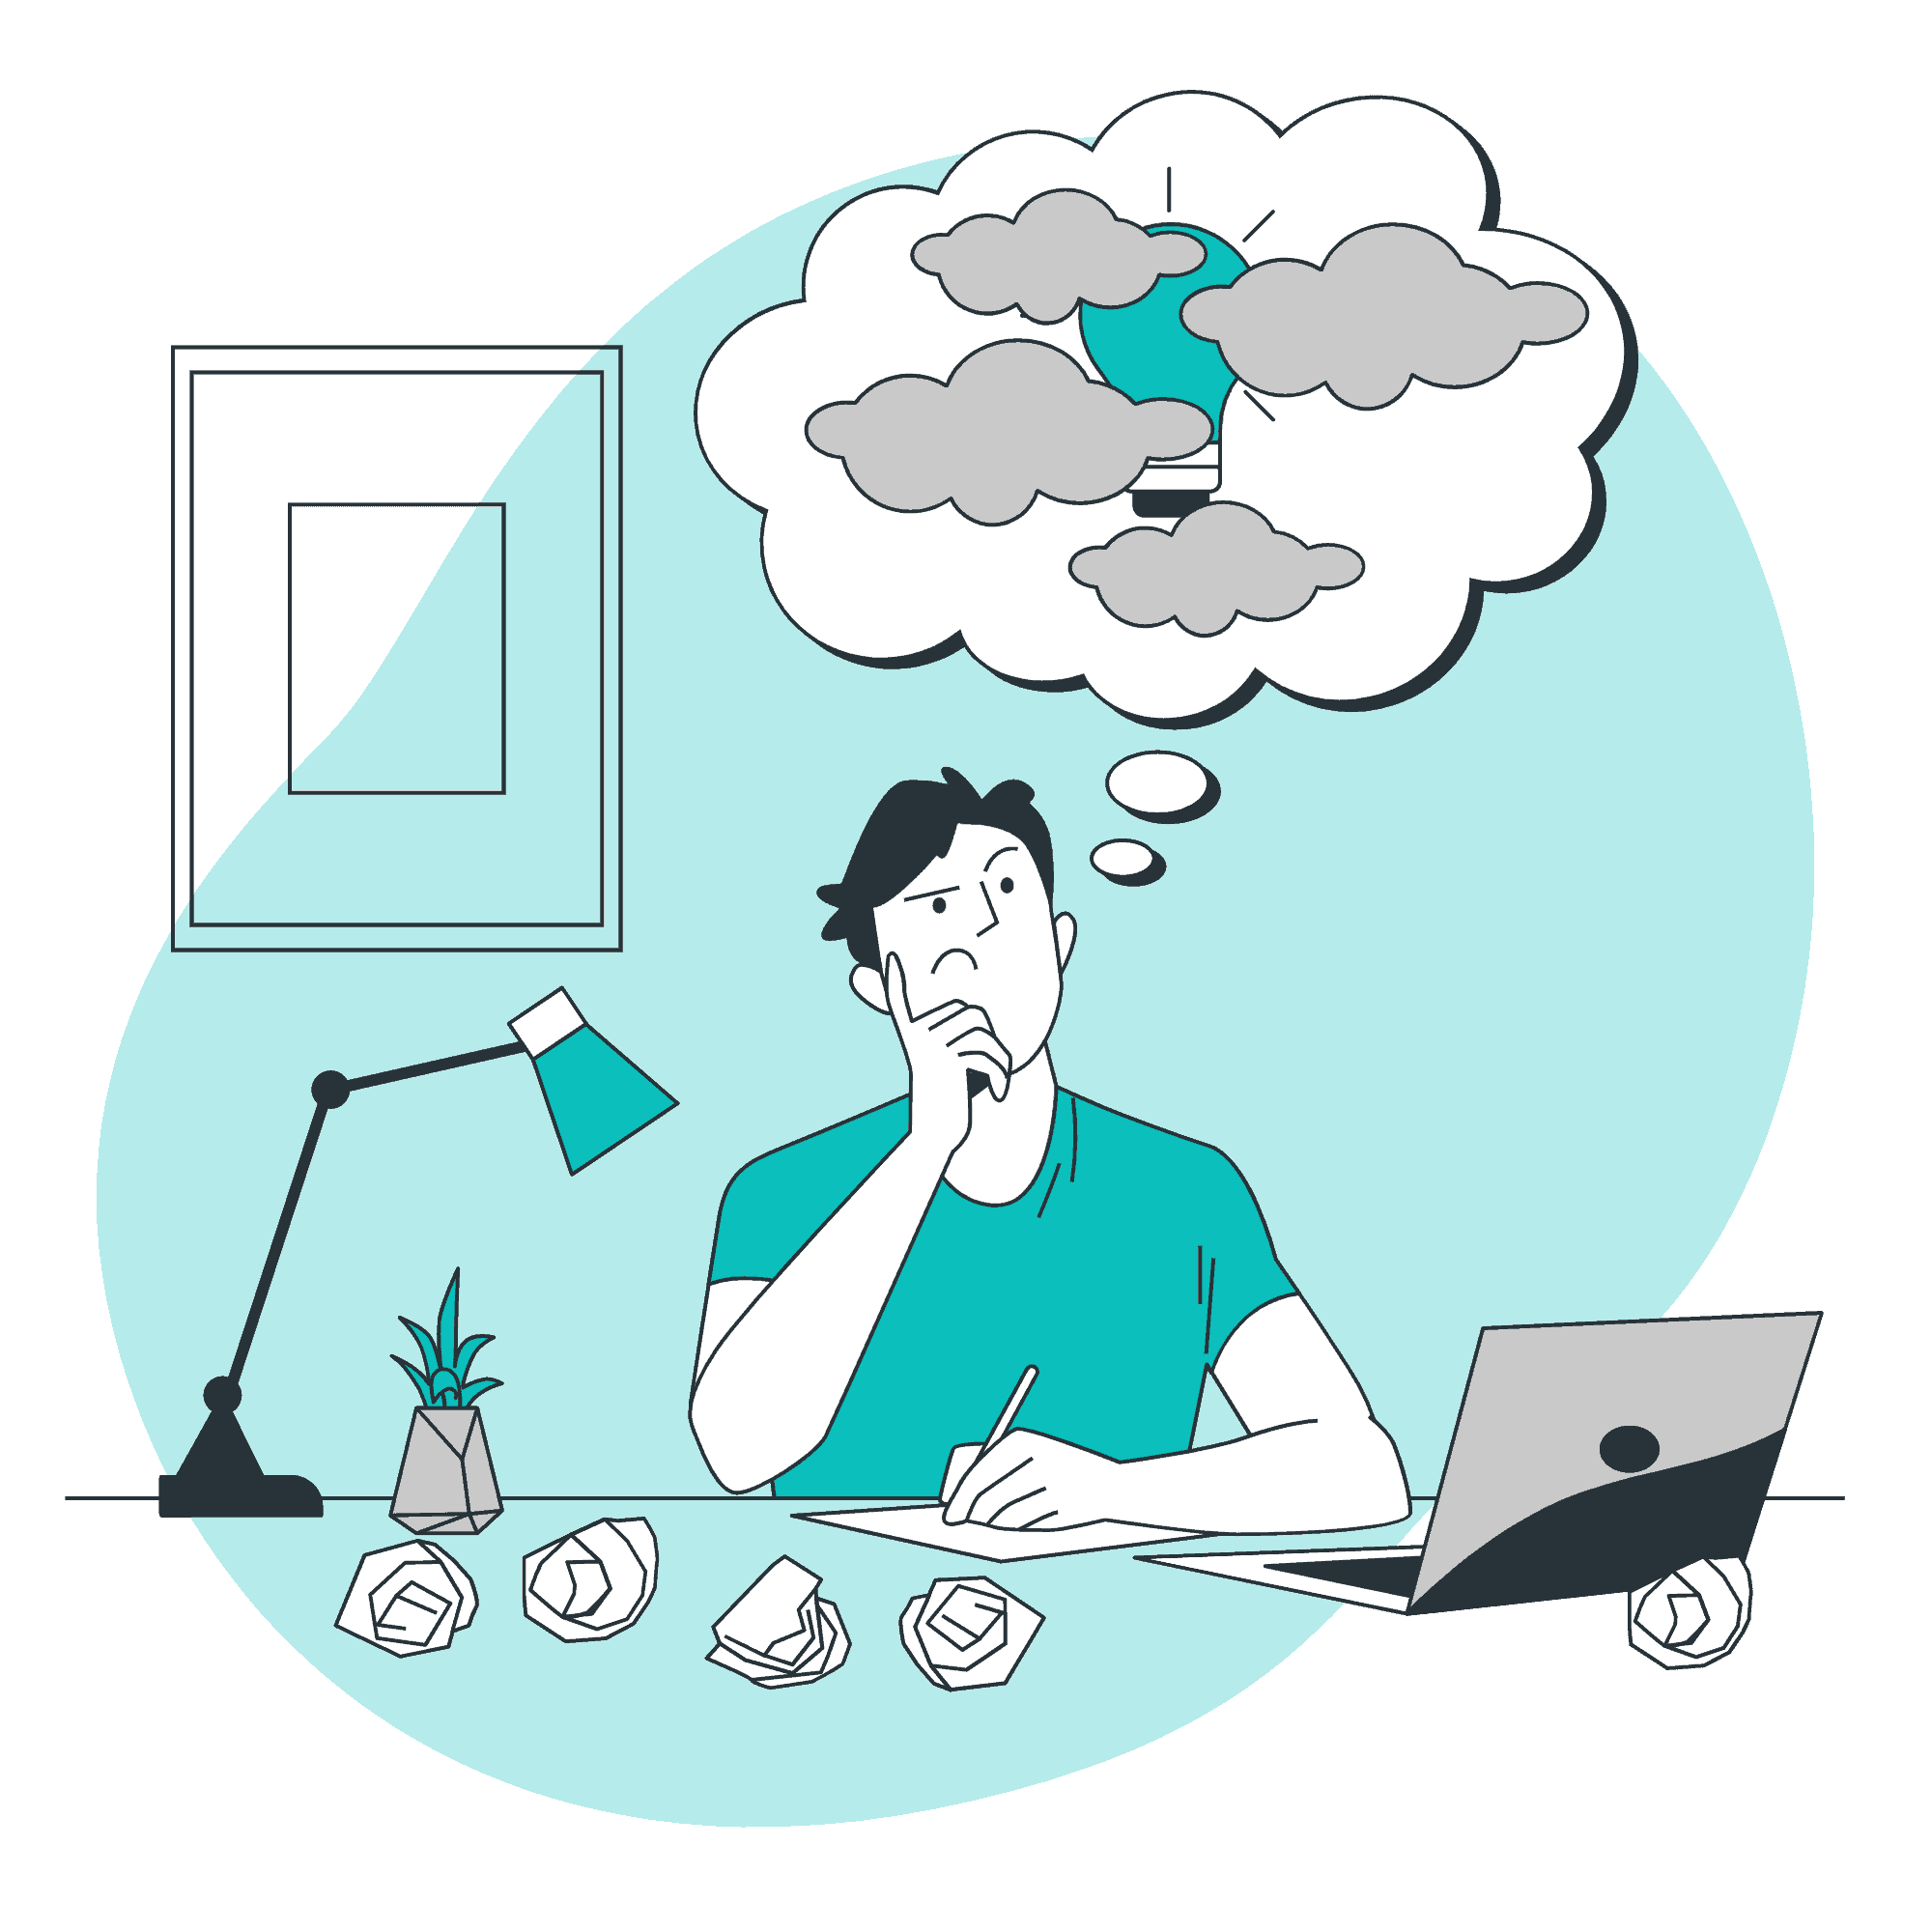 man at desk with laptop, lamp, and balled up paper, thought cloud shows a lightbulb covered in clouds. Idea illustrations by Storyset